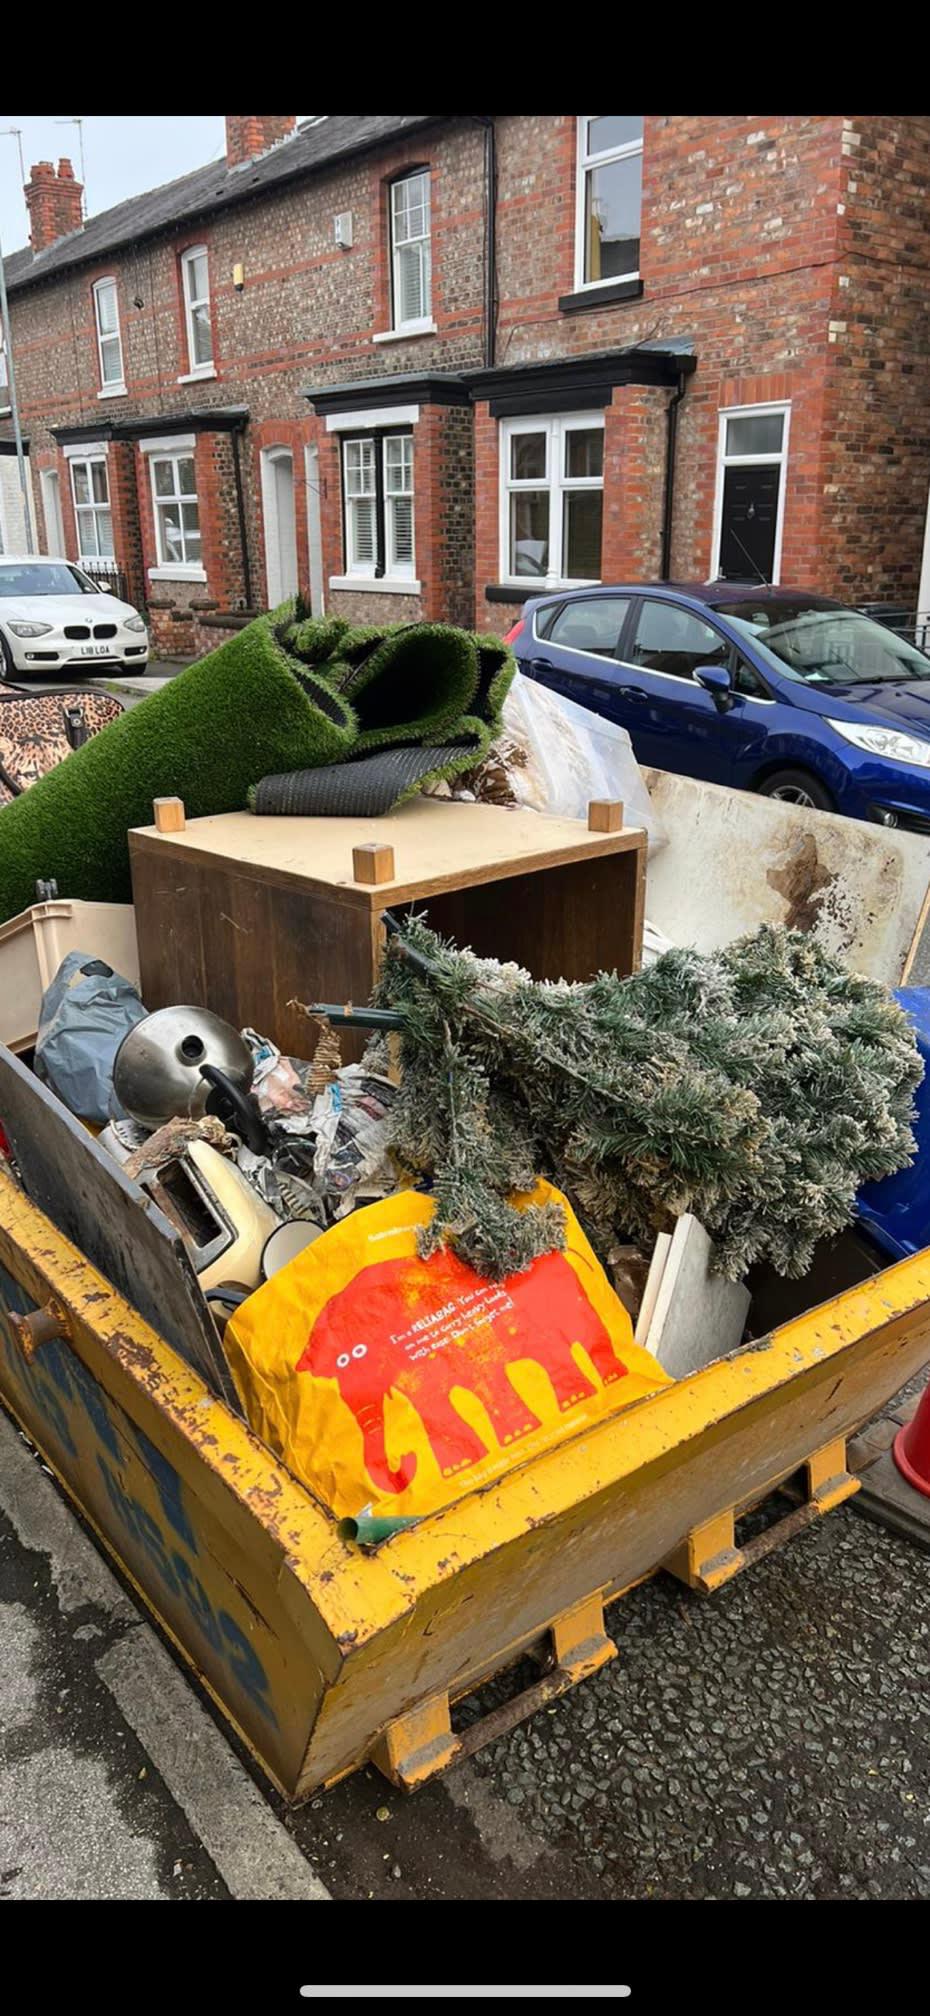 Clear and Away Waste Clearances Wigan 07549 310094